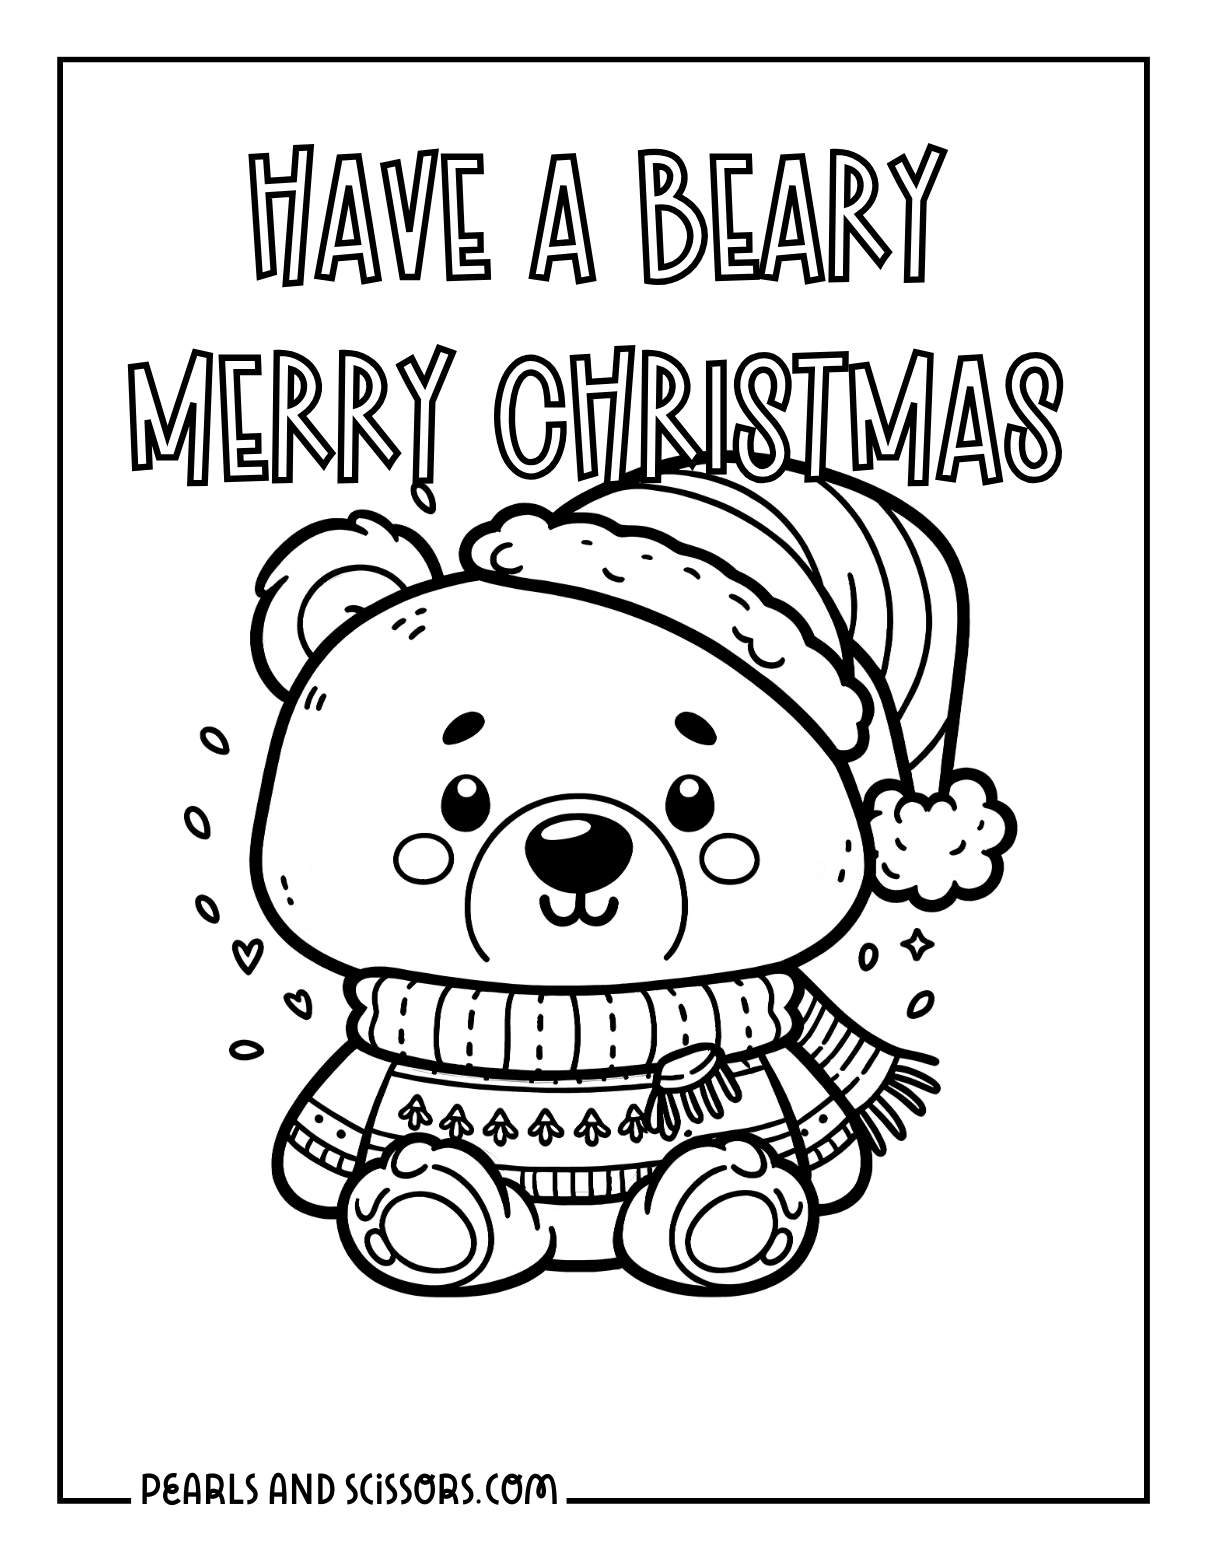 Kawaii teddy bear wearing a Santa hat, scarf and christmas sweater coloring page.